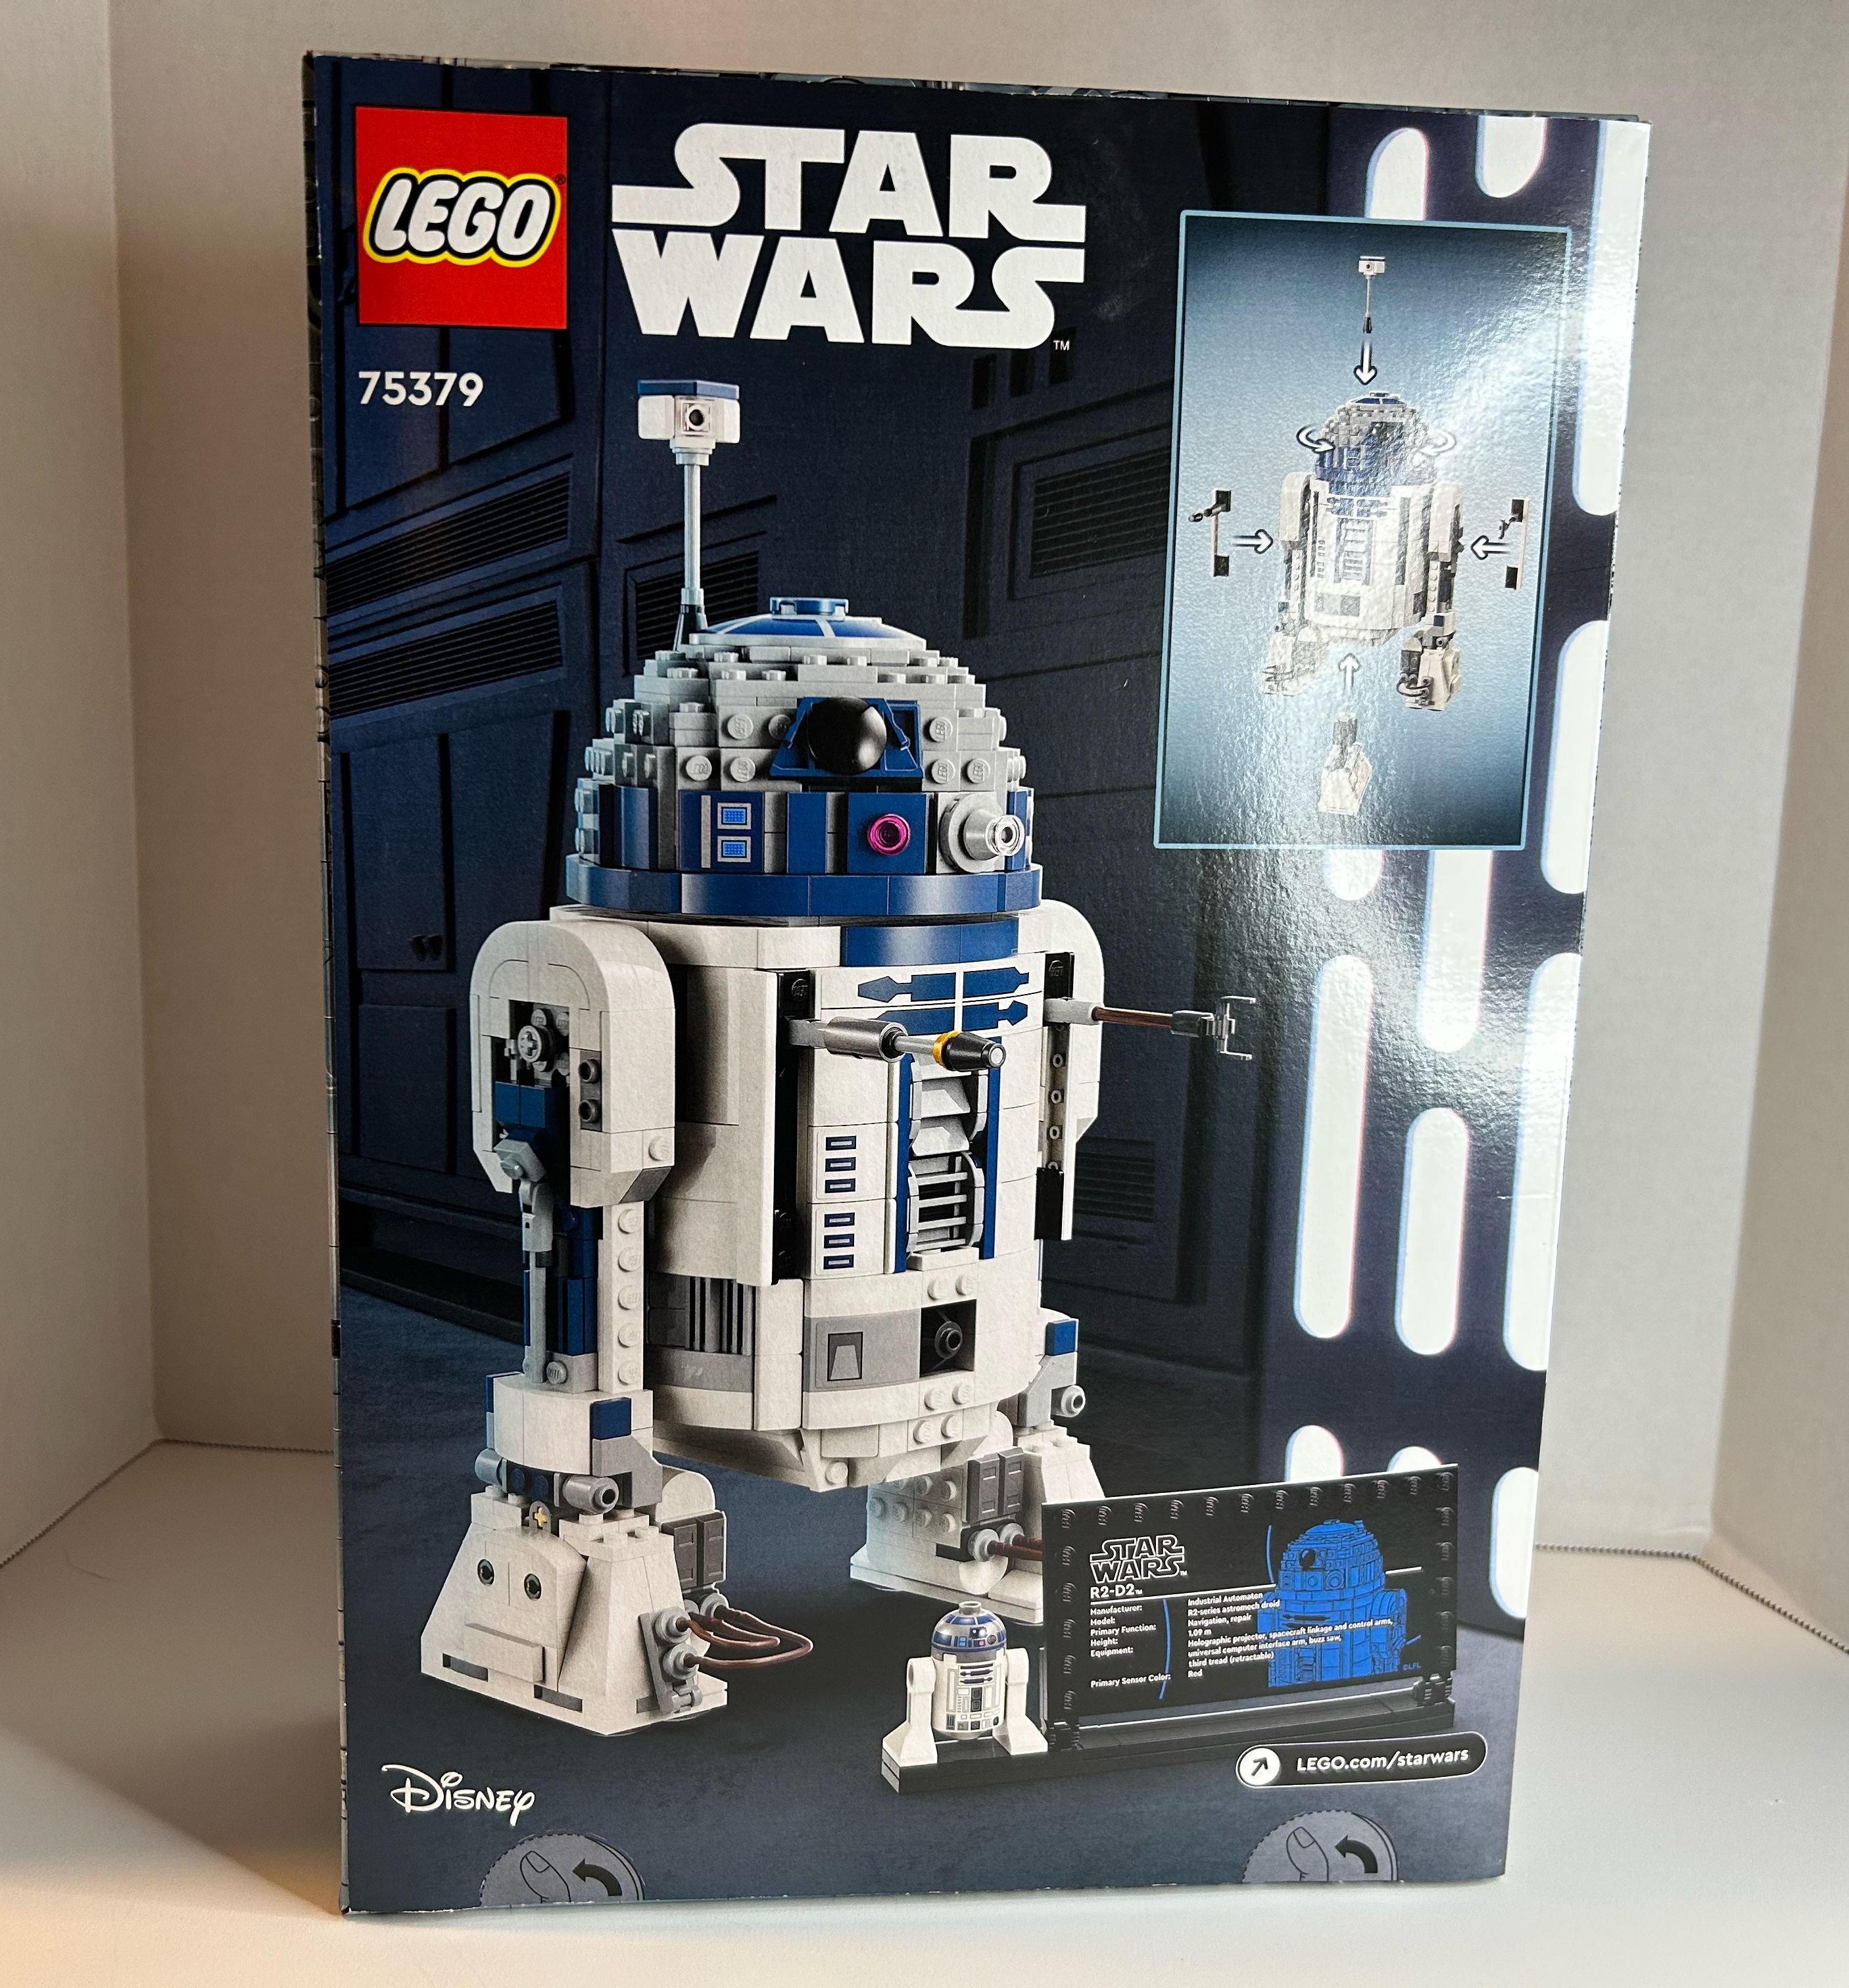 LEGO's New R2-D2 Set Will Give You Deja Vu (But That's A Good Thing)